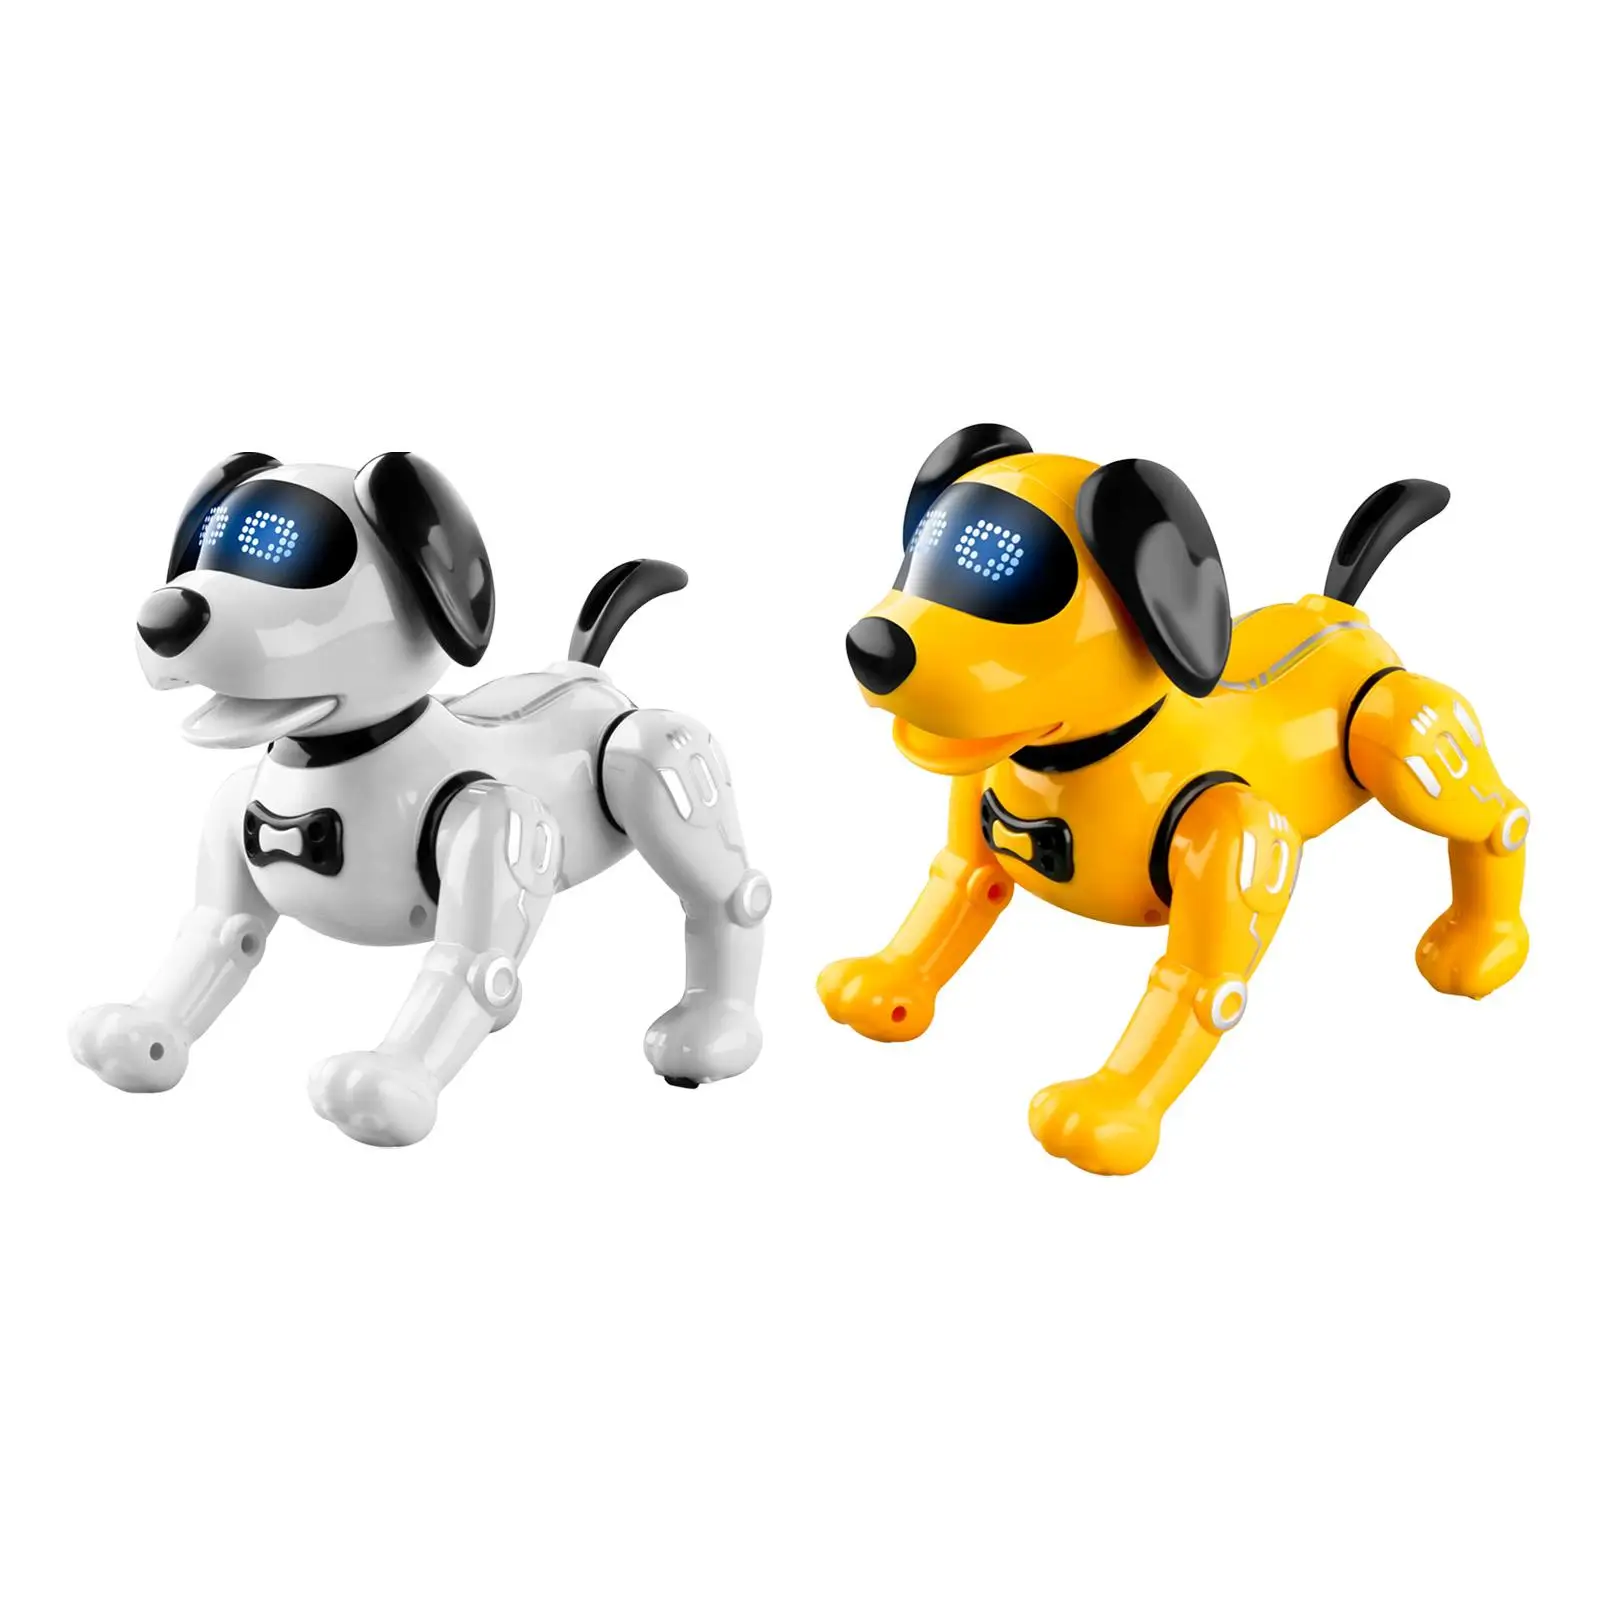 Remote Control Robot Dog toy cute smart Dancing robot Dog Toy Electronic Pet Stunt Puppy for Children Boys and Girls Toddlers